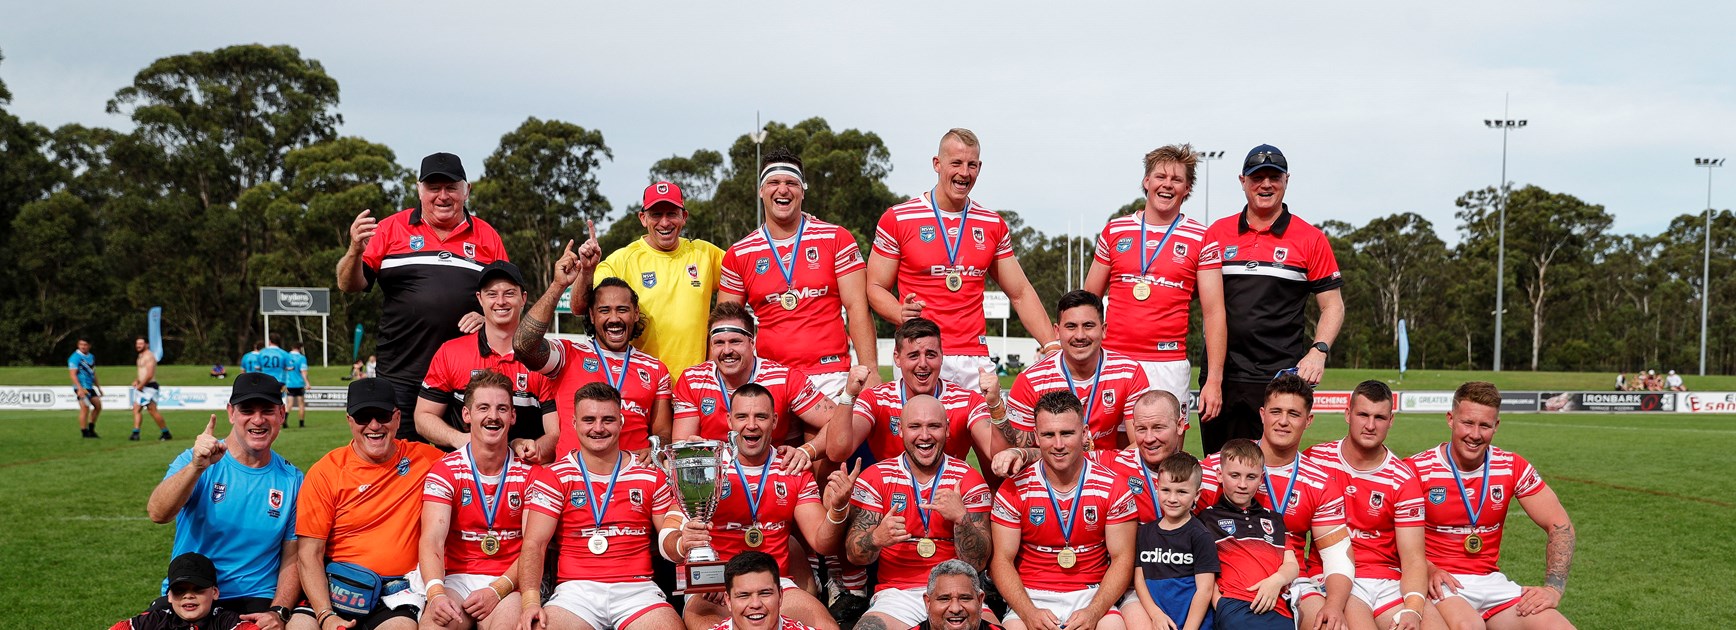 Dragons finally claim their Country Championships title